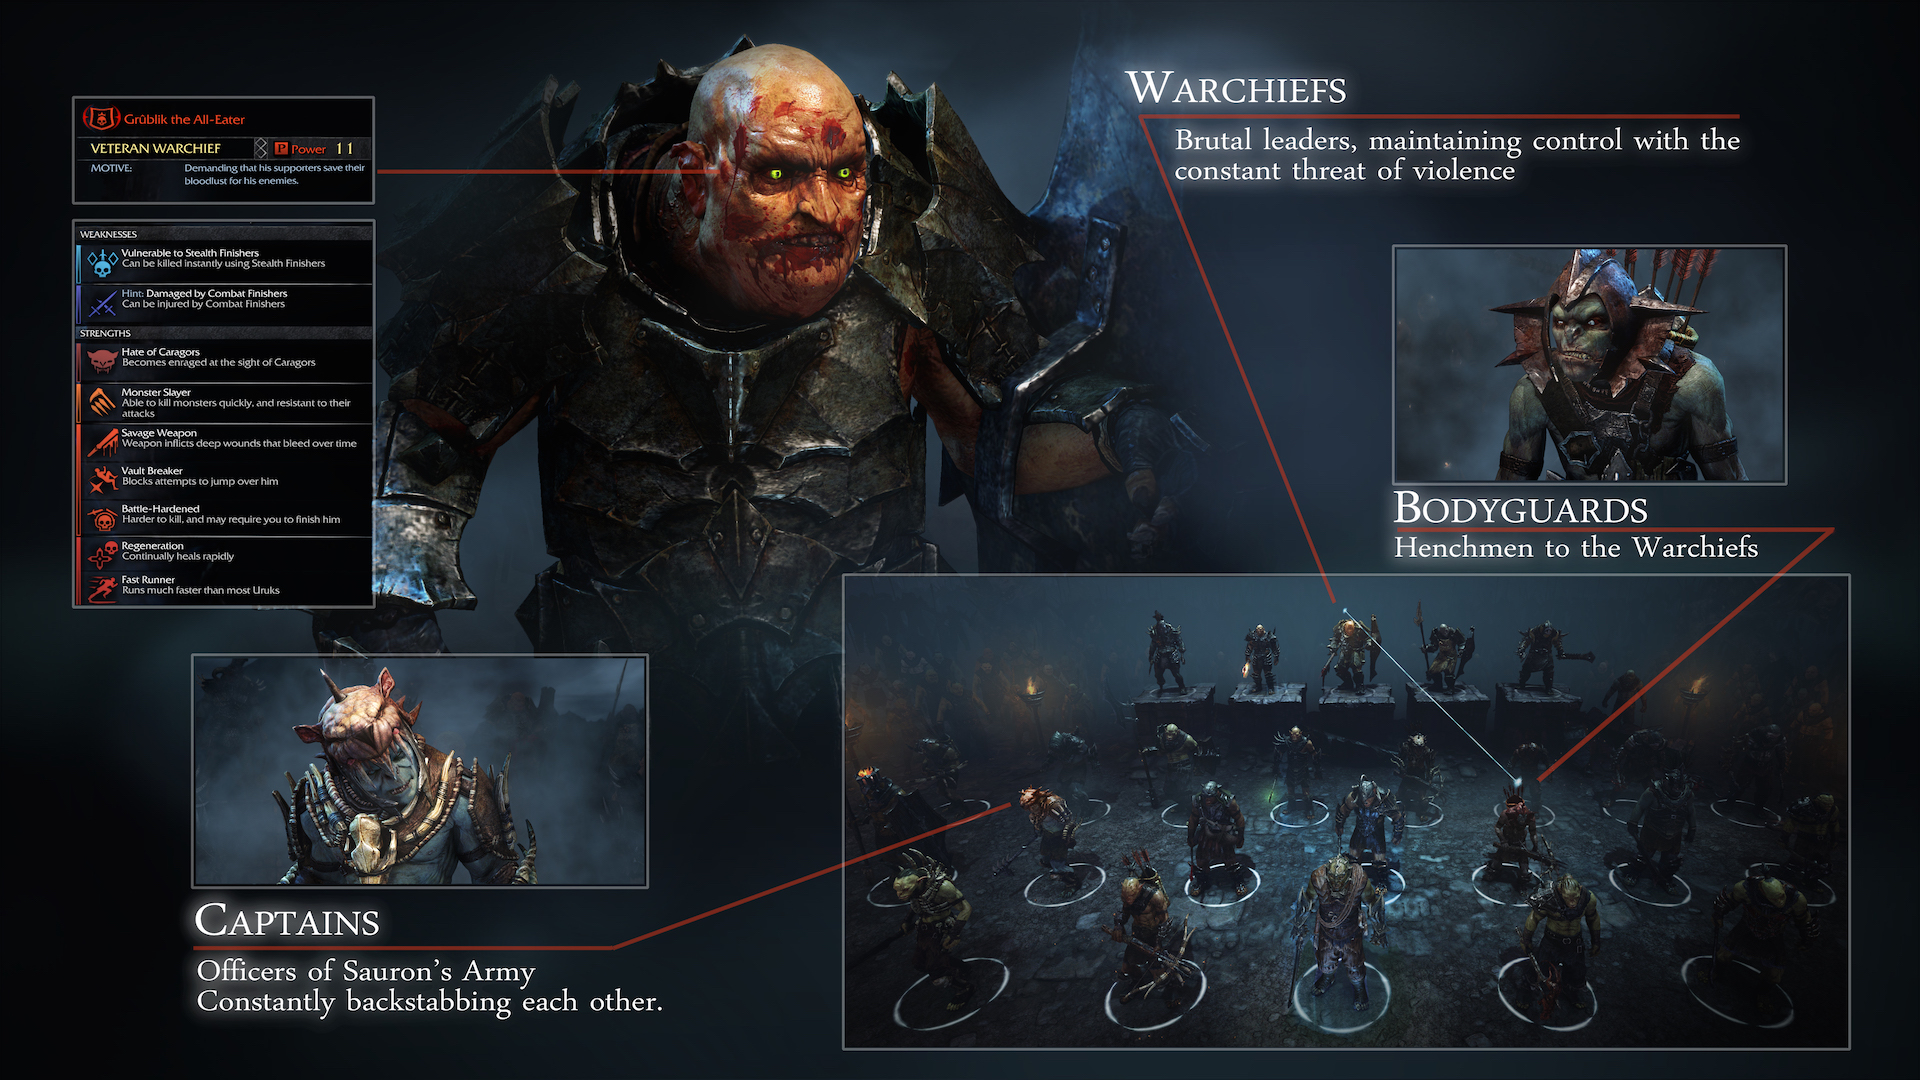 Middle-earth: Shadow of Mordor first-look